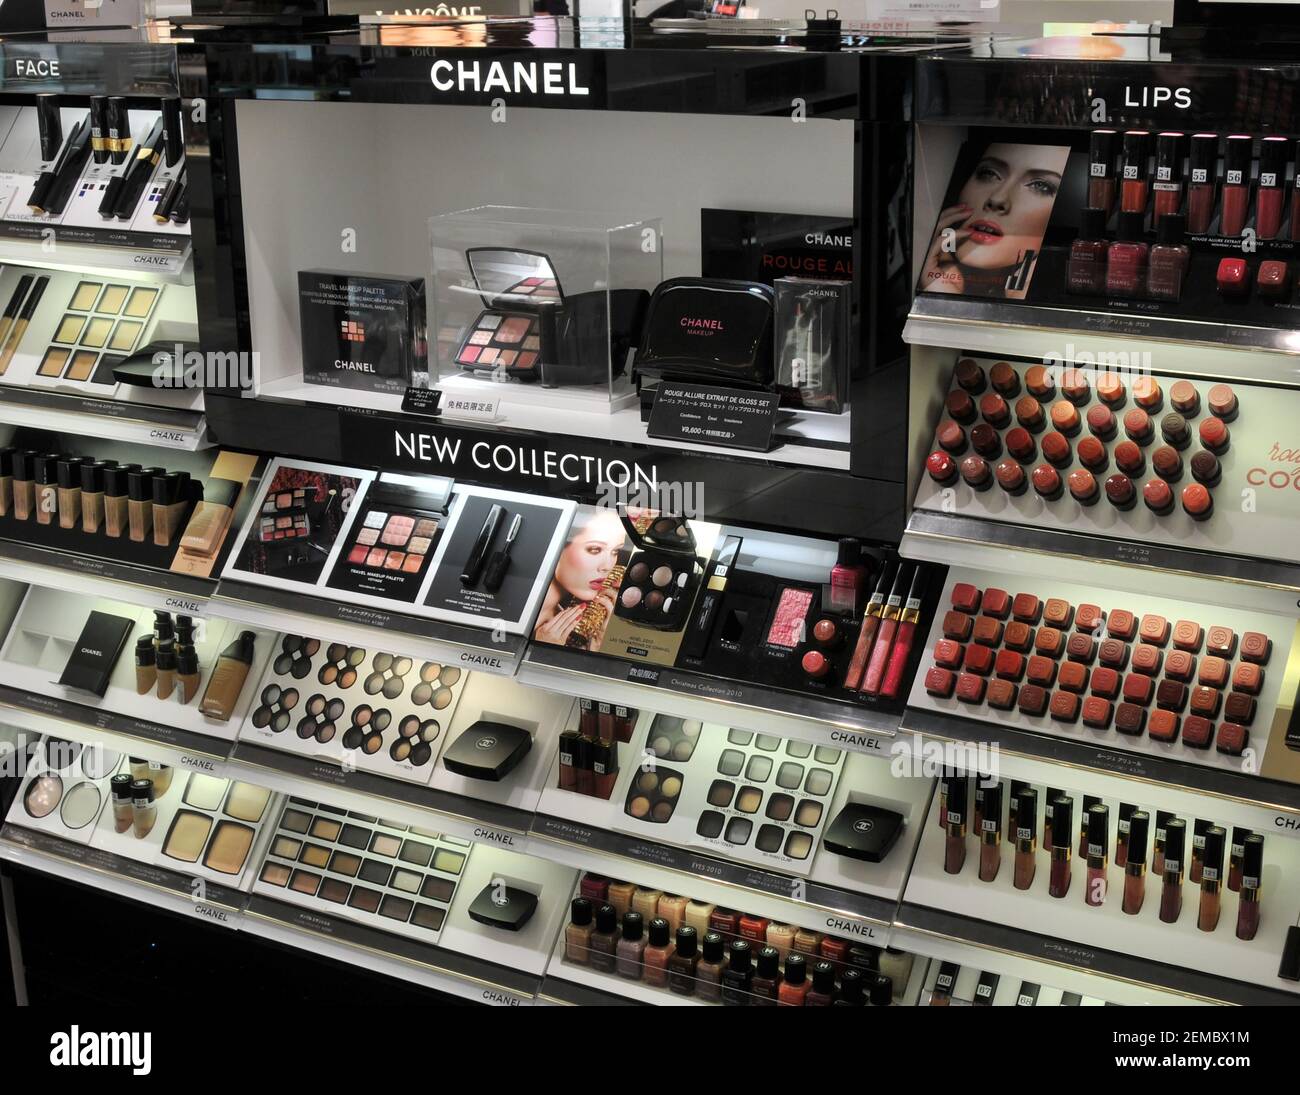 Chanel Makeup High Resolution Stock Photography and Images - Alamy